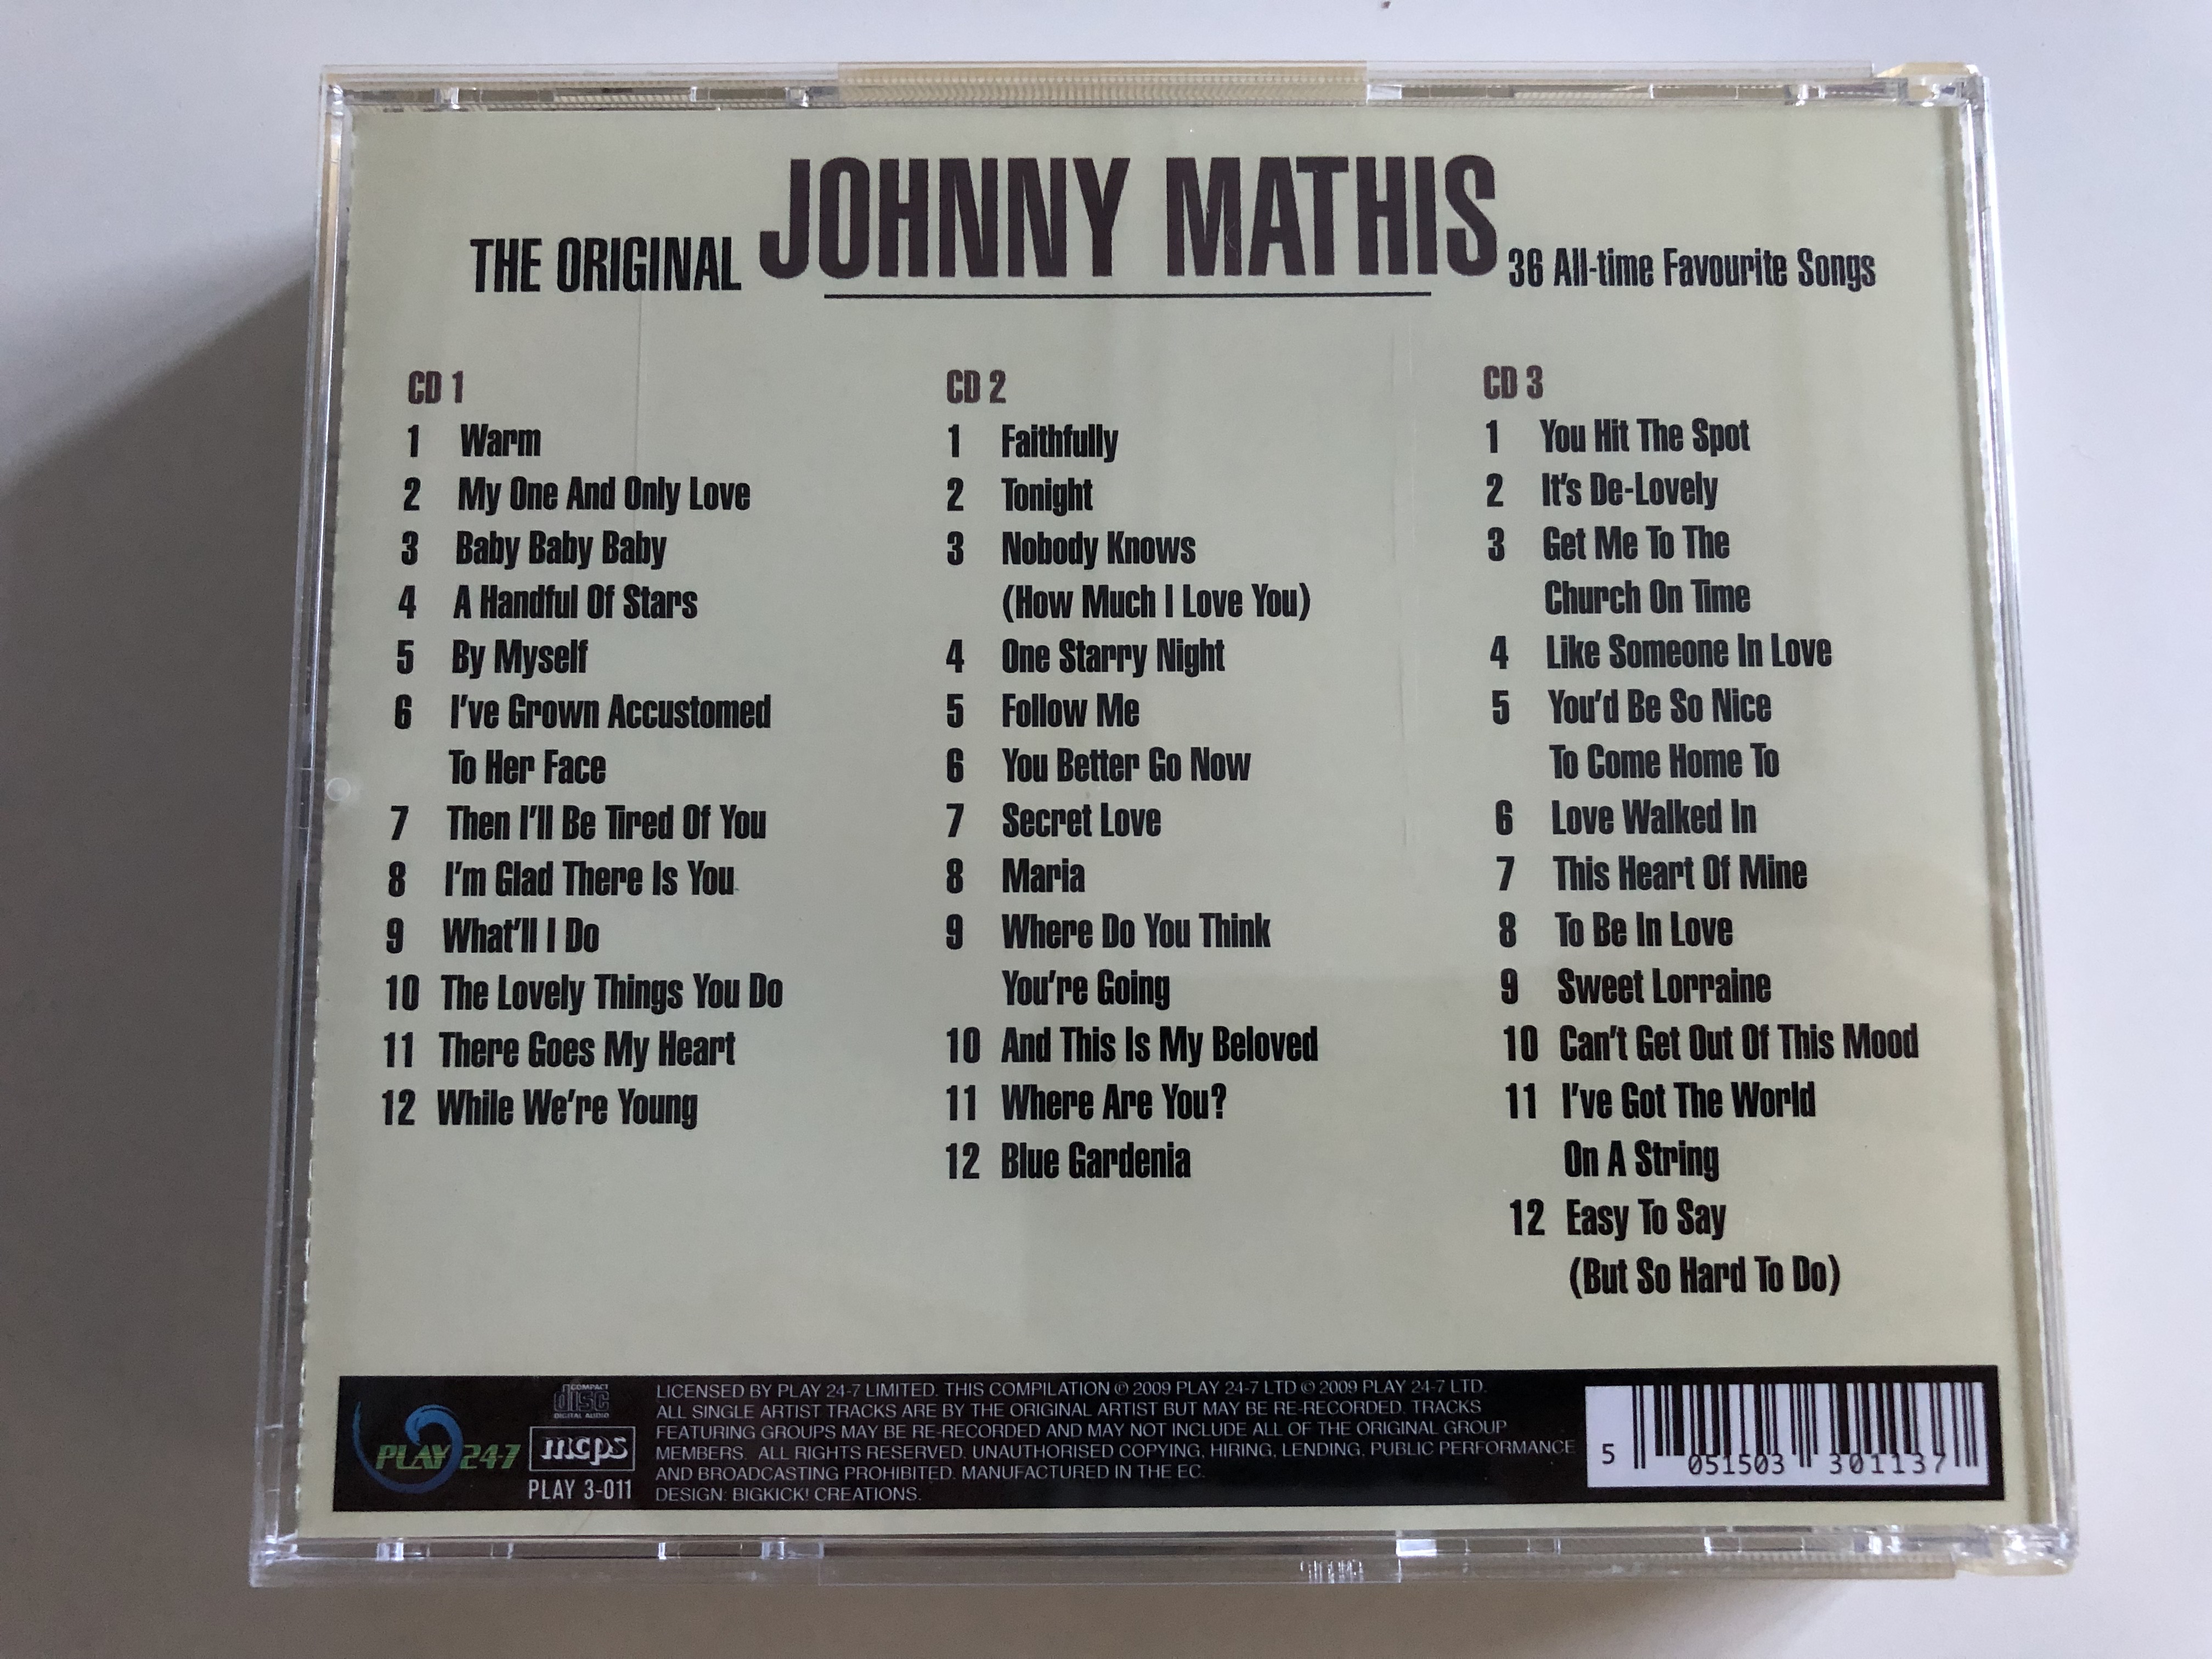 the-original-johnny-mathis-38-all-time-favourite-songs-3-cd-set-original-masters-collections-play-3-011-6-.jpg